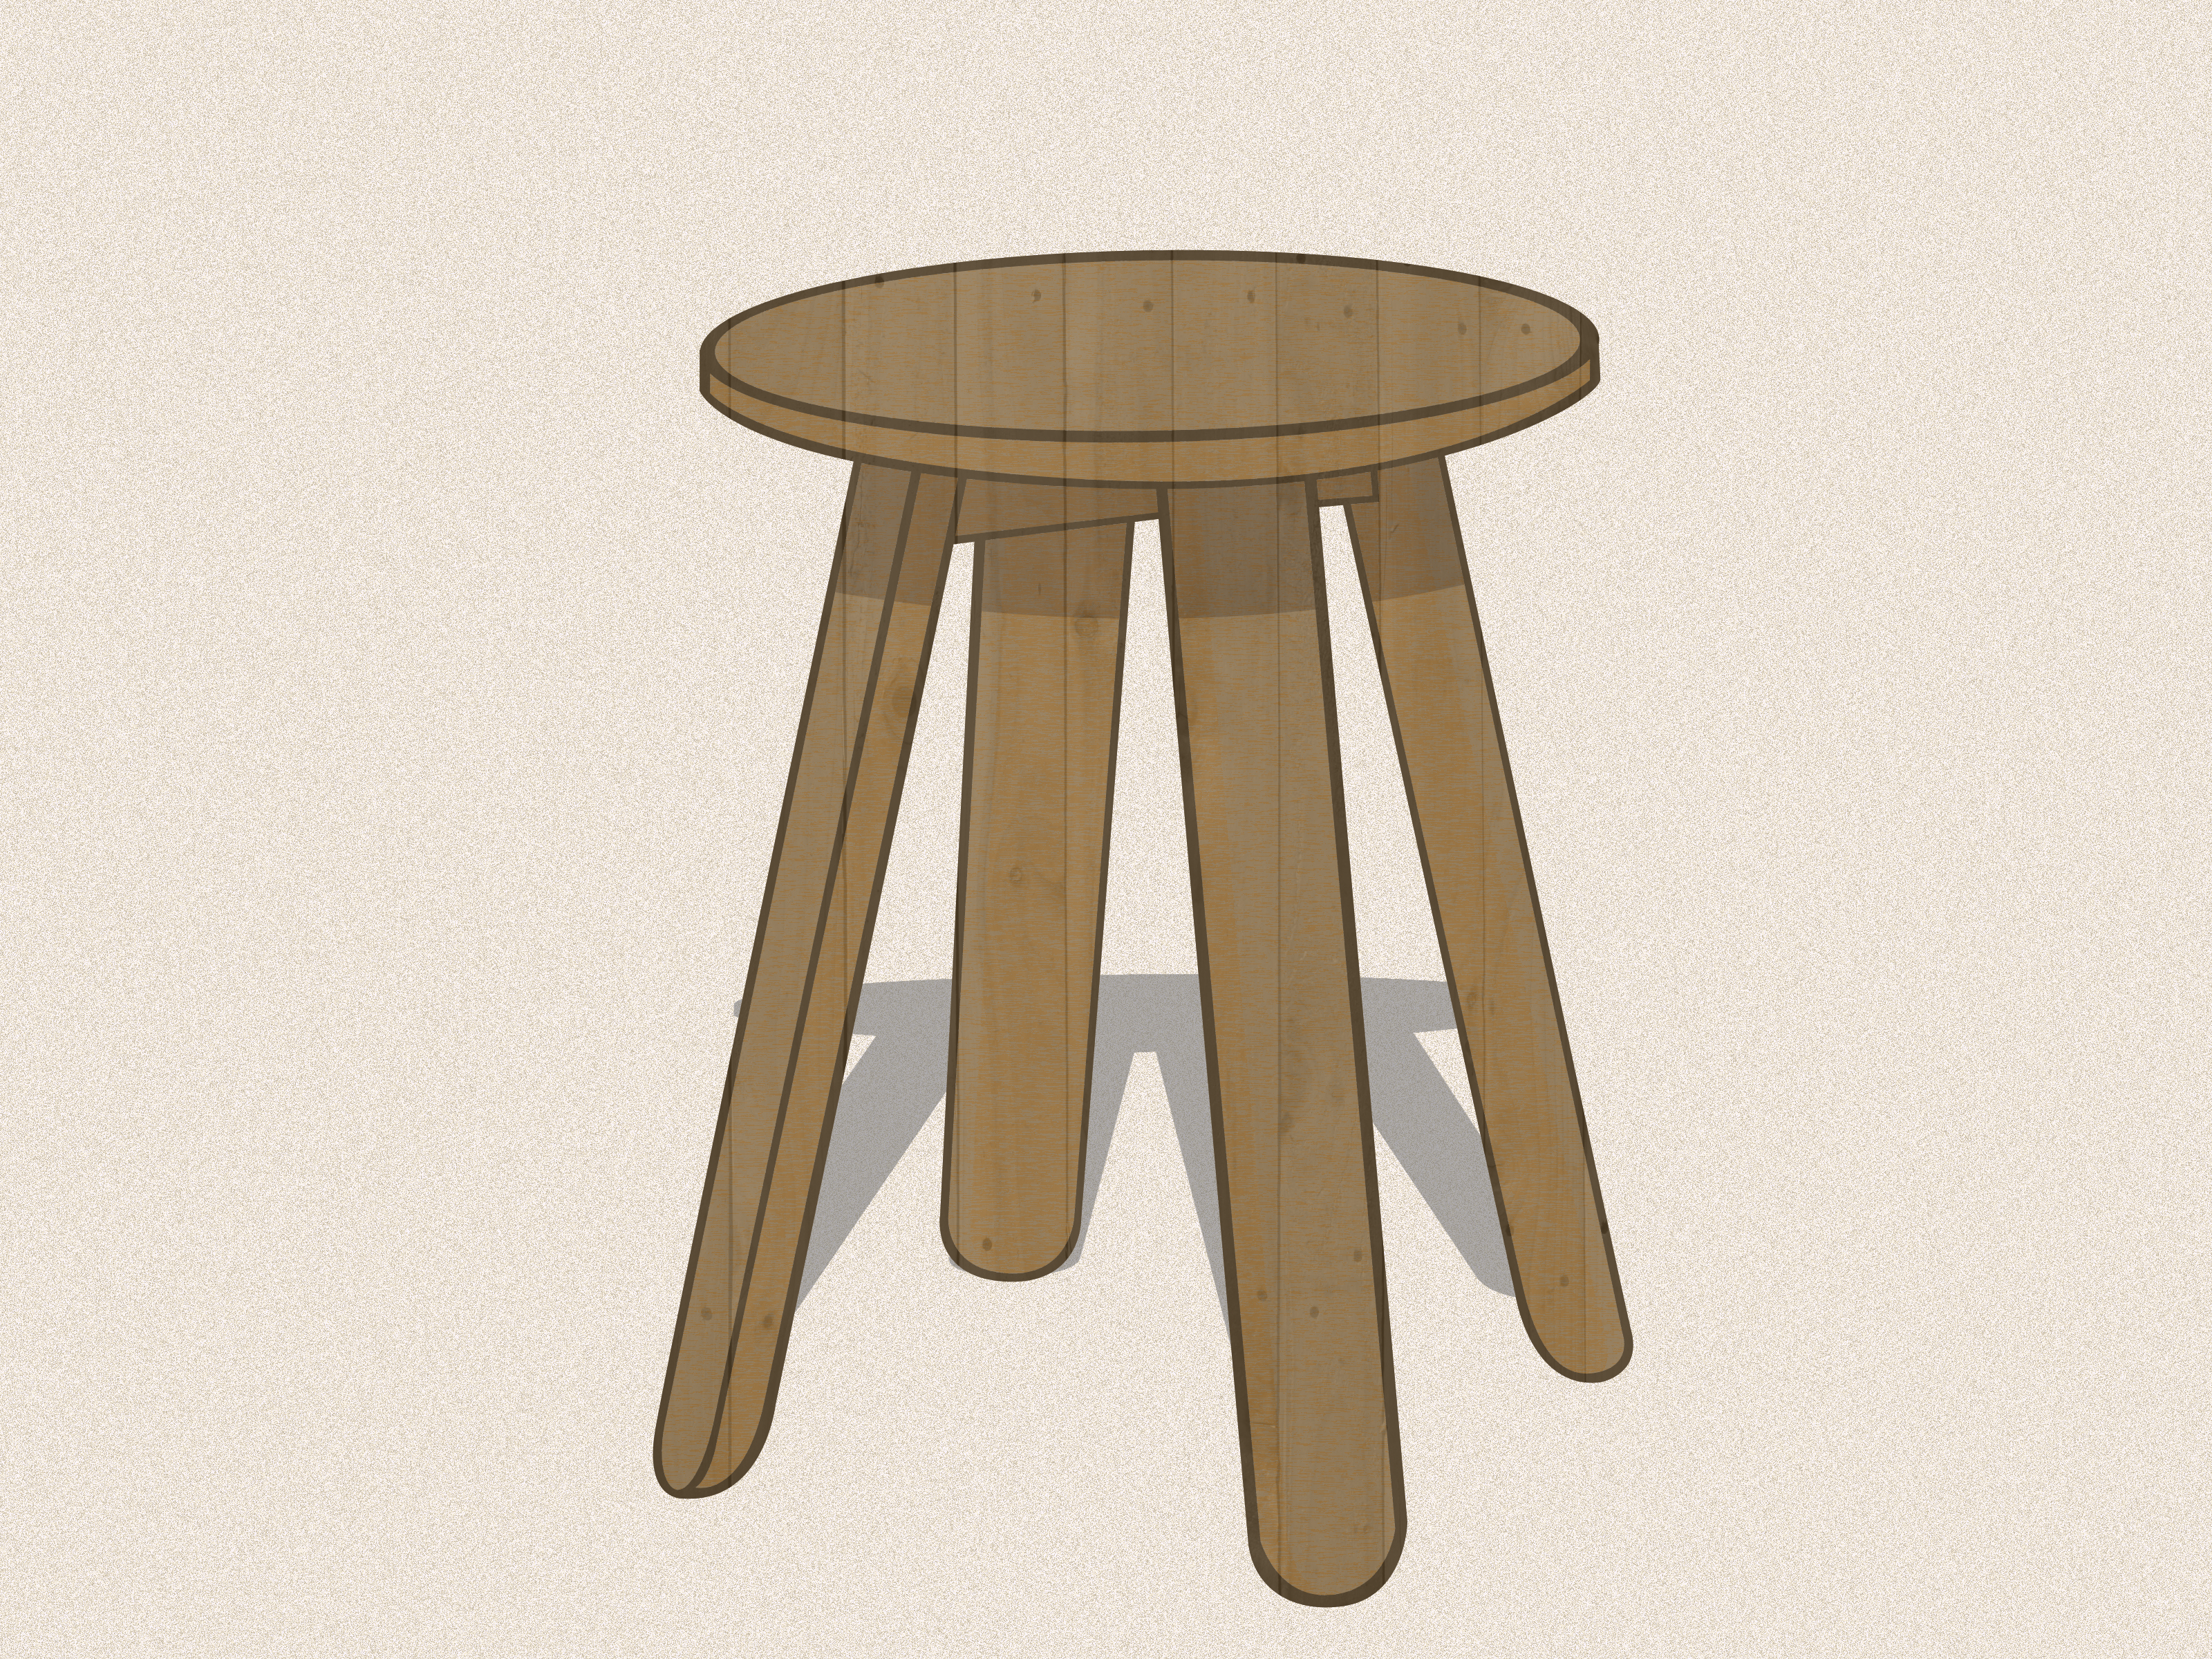 How to Draw a Stool: 6 Steps (with Pictures) - wikiHow